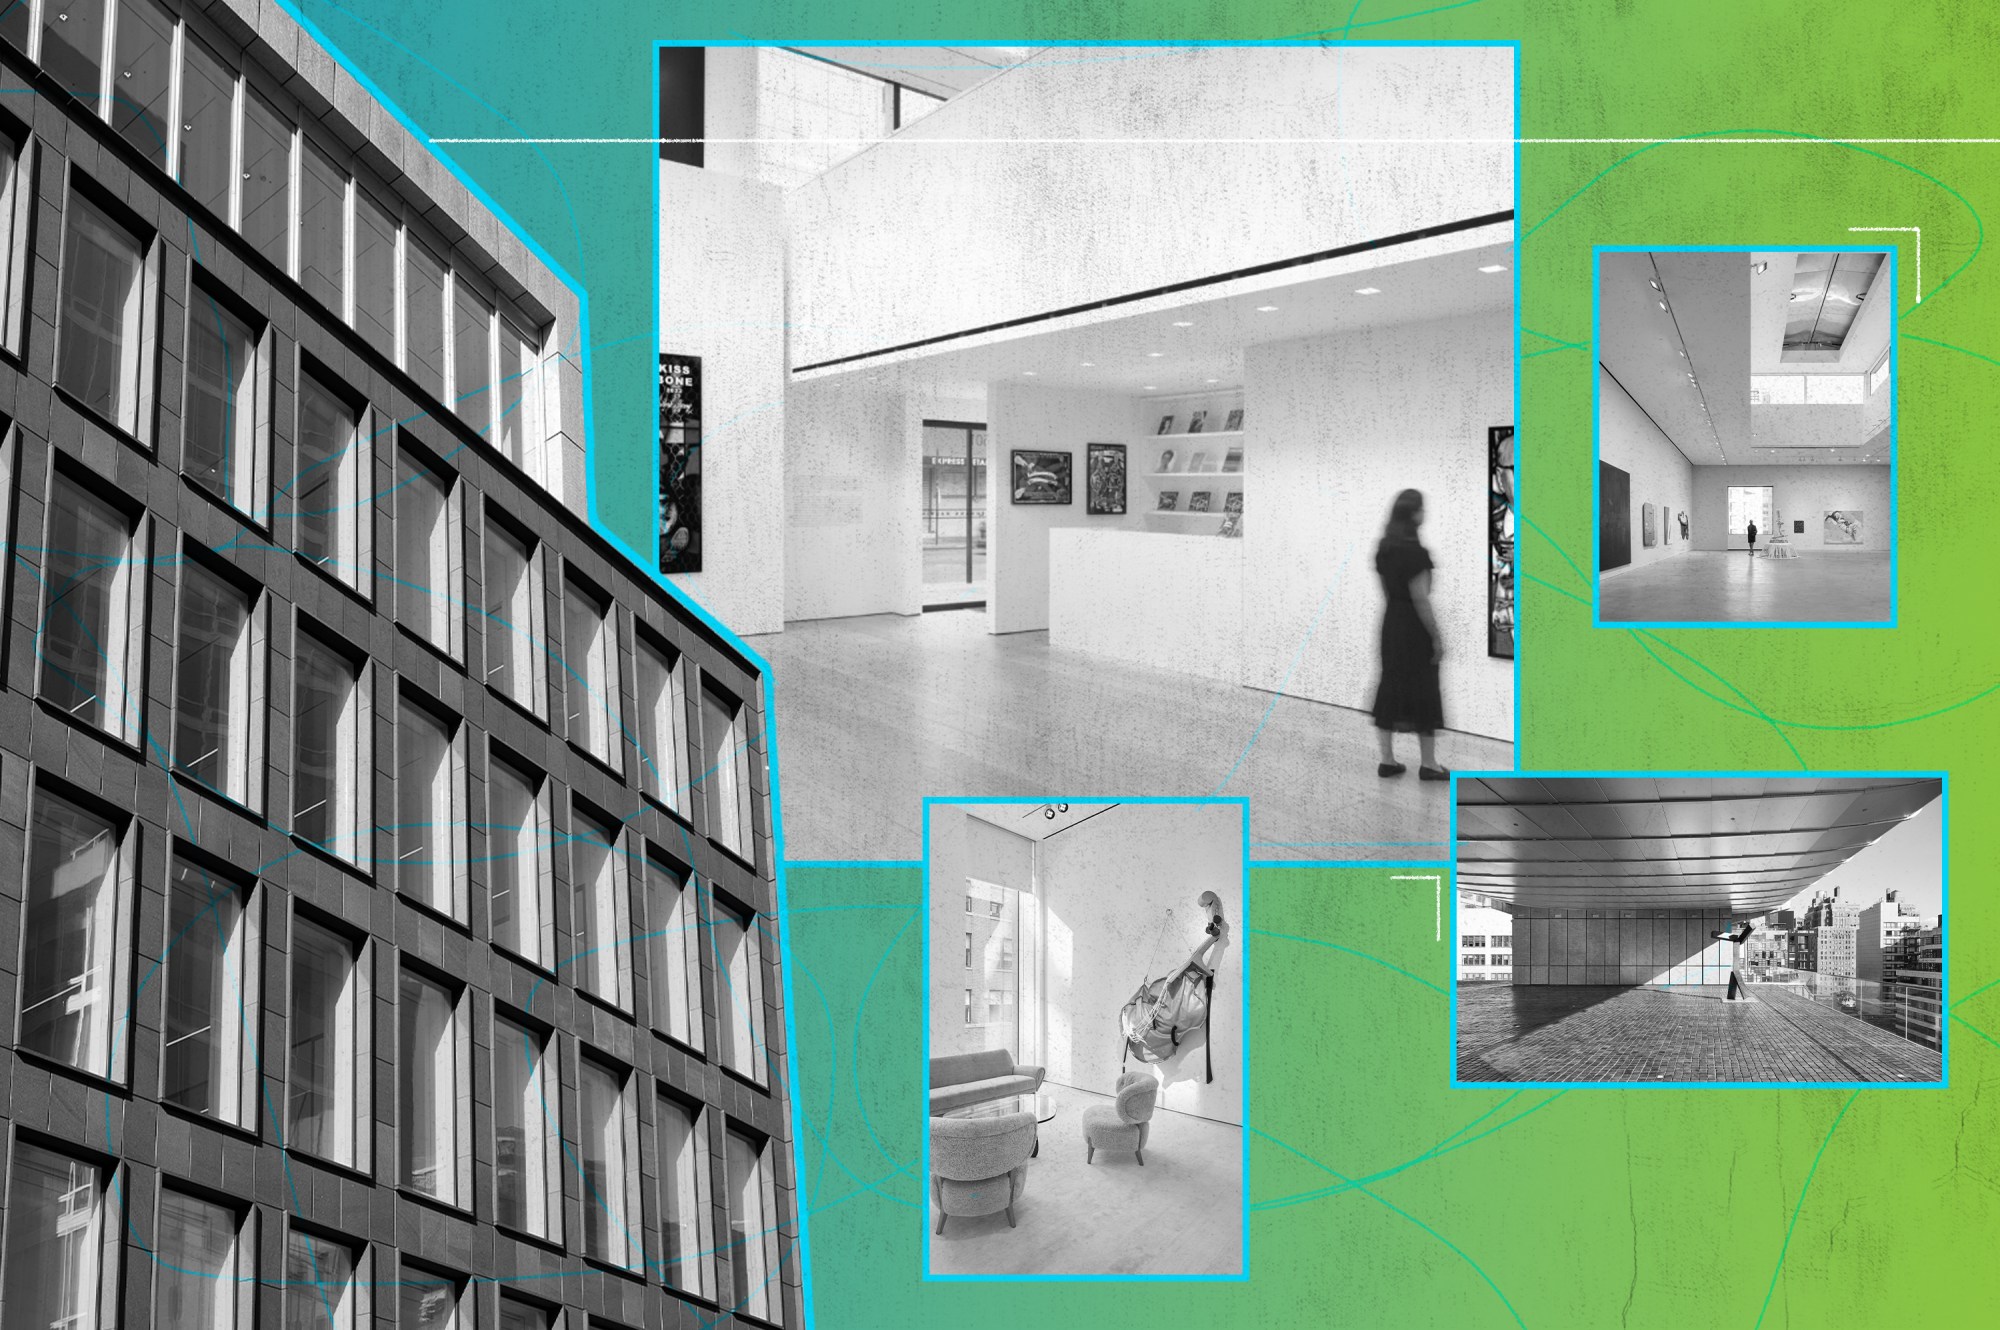 A photo illustration showing various shots of art galleries in black and white against a blue-to-green gradient background.